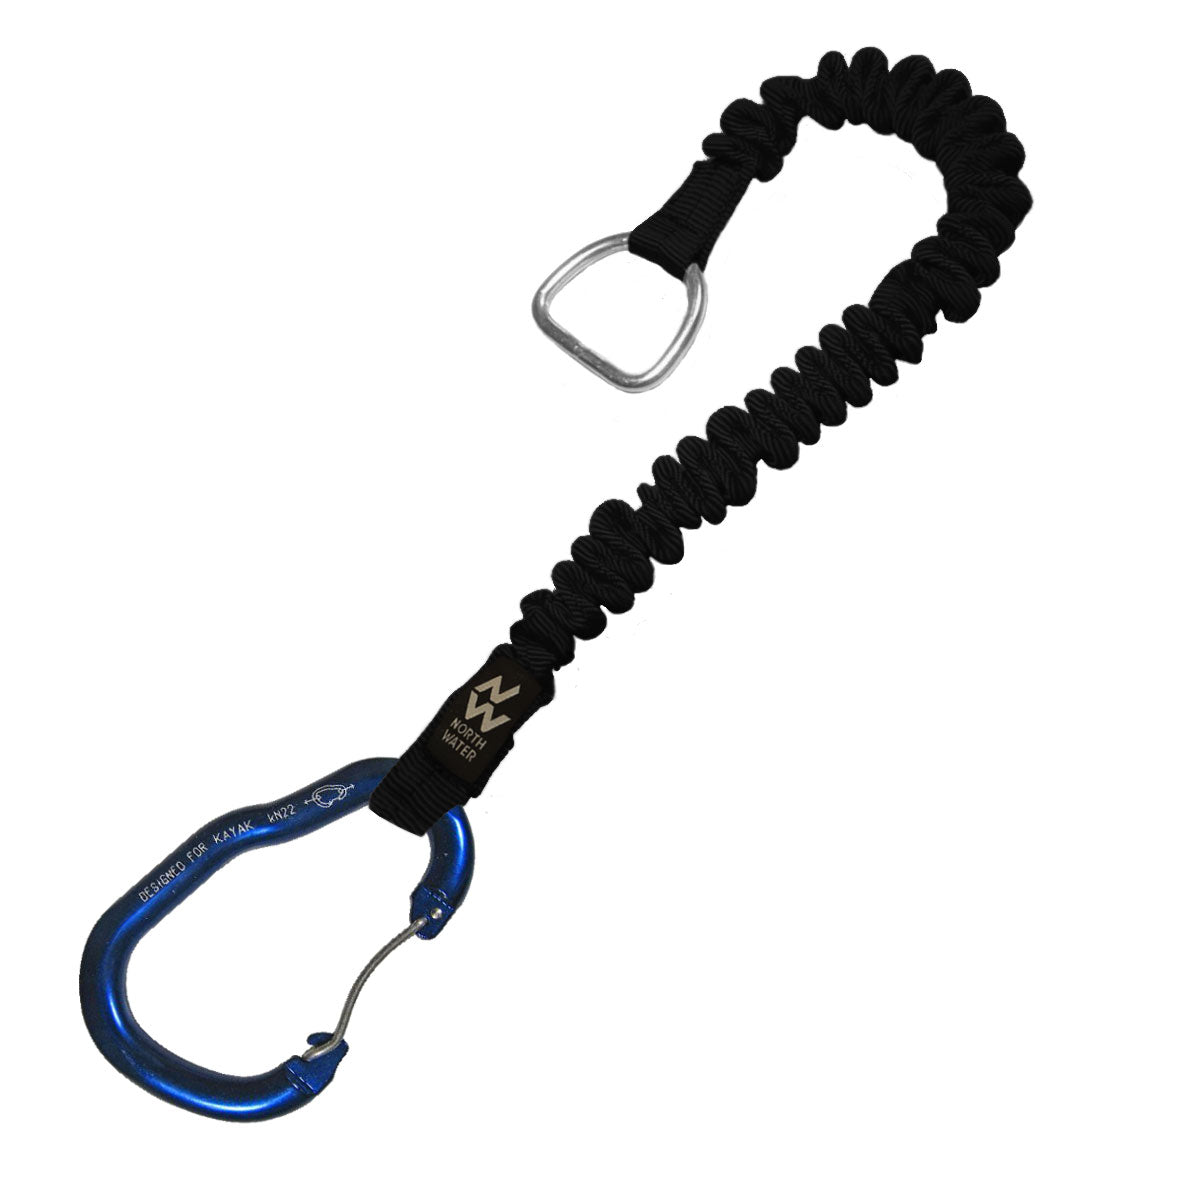 North Water Pig Tail with Paddle Carabiner